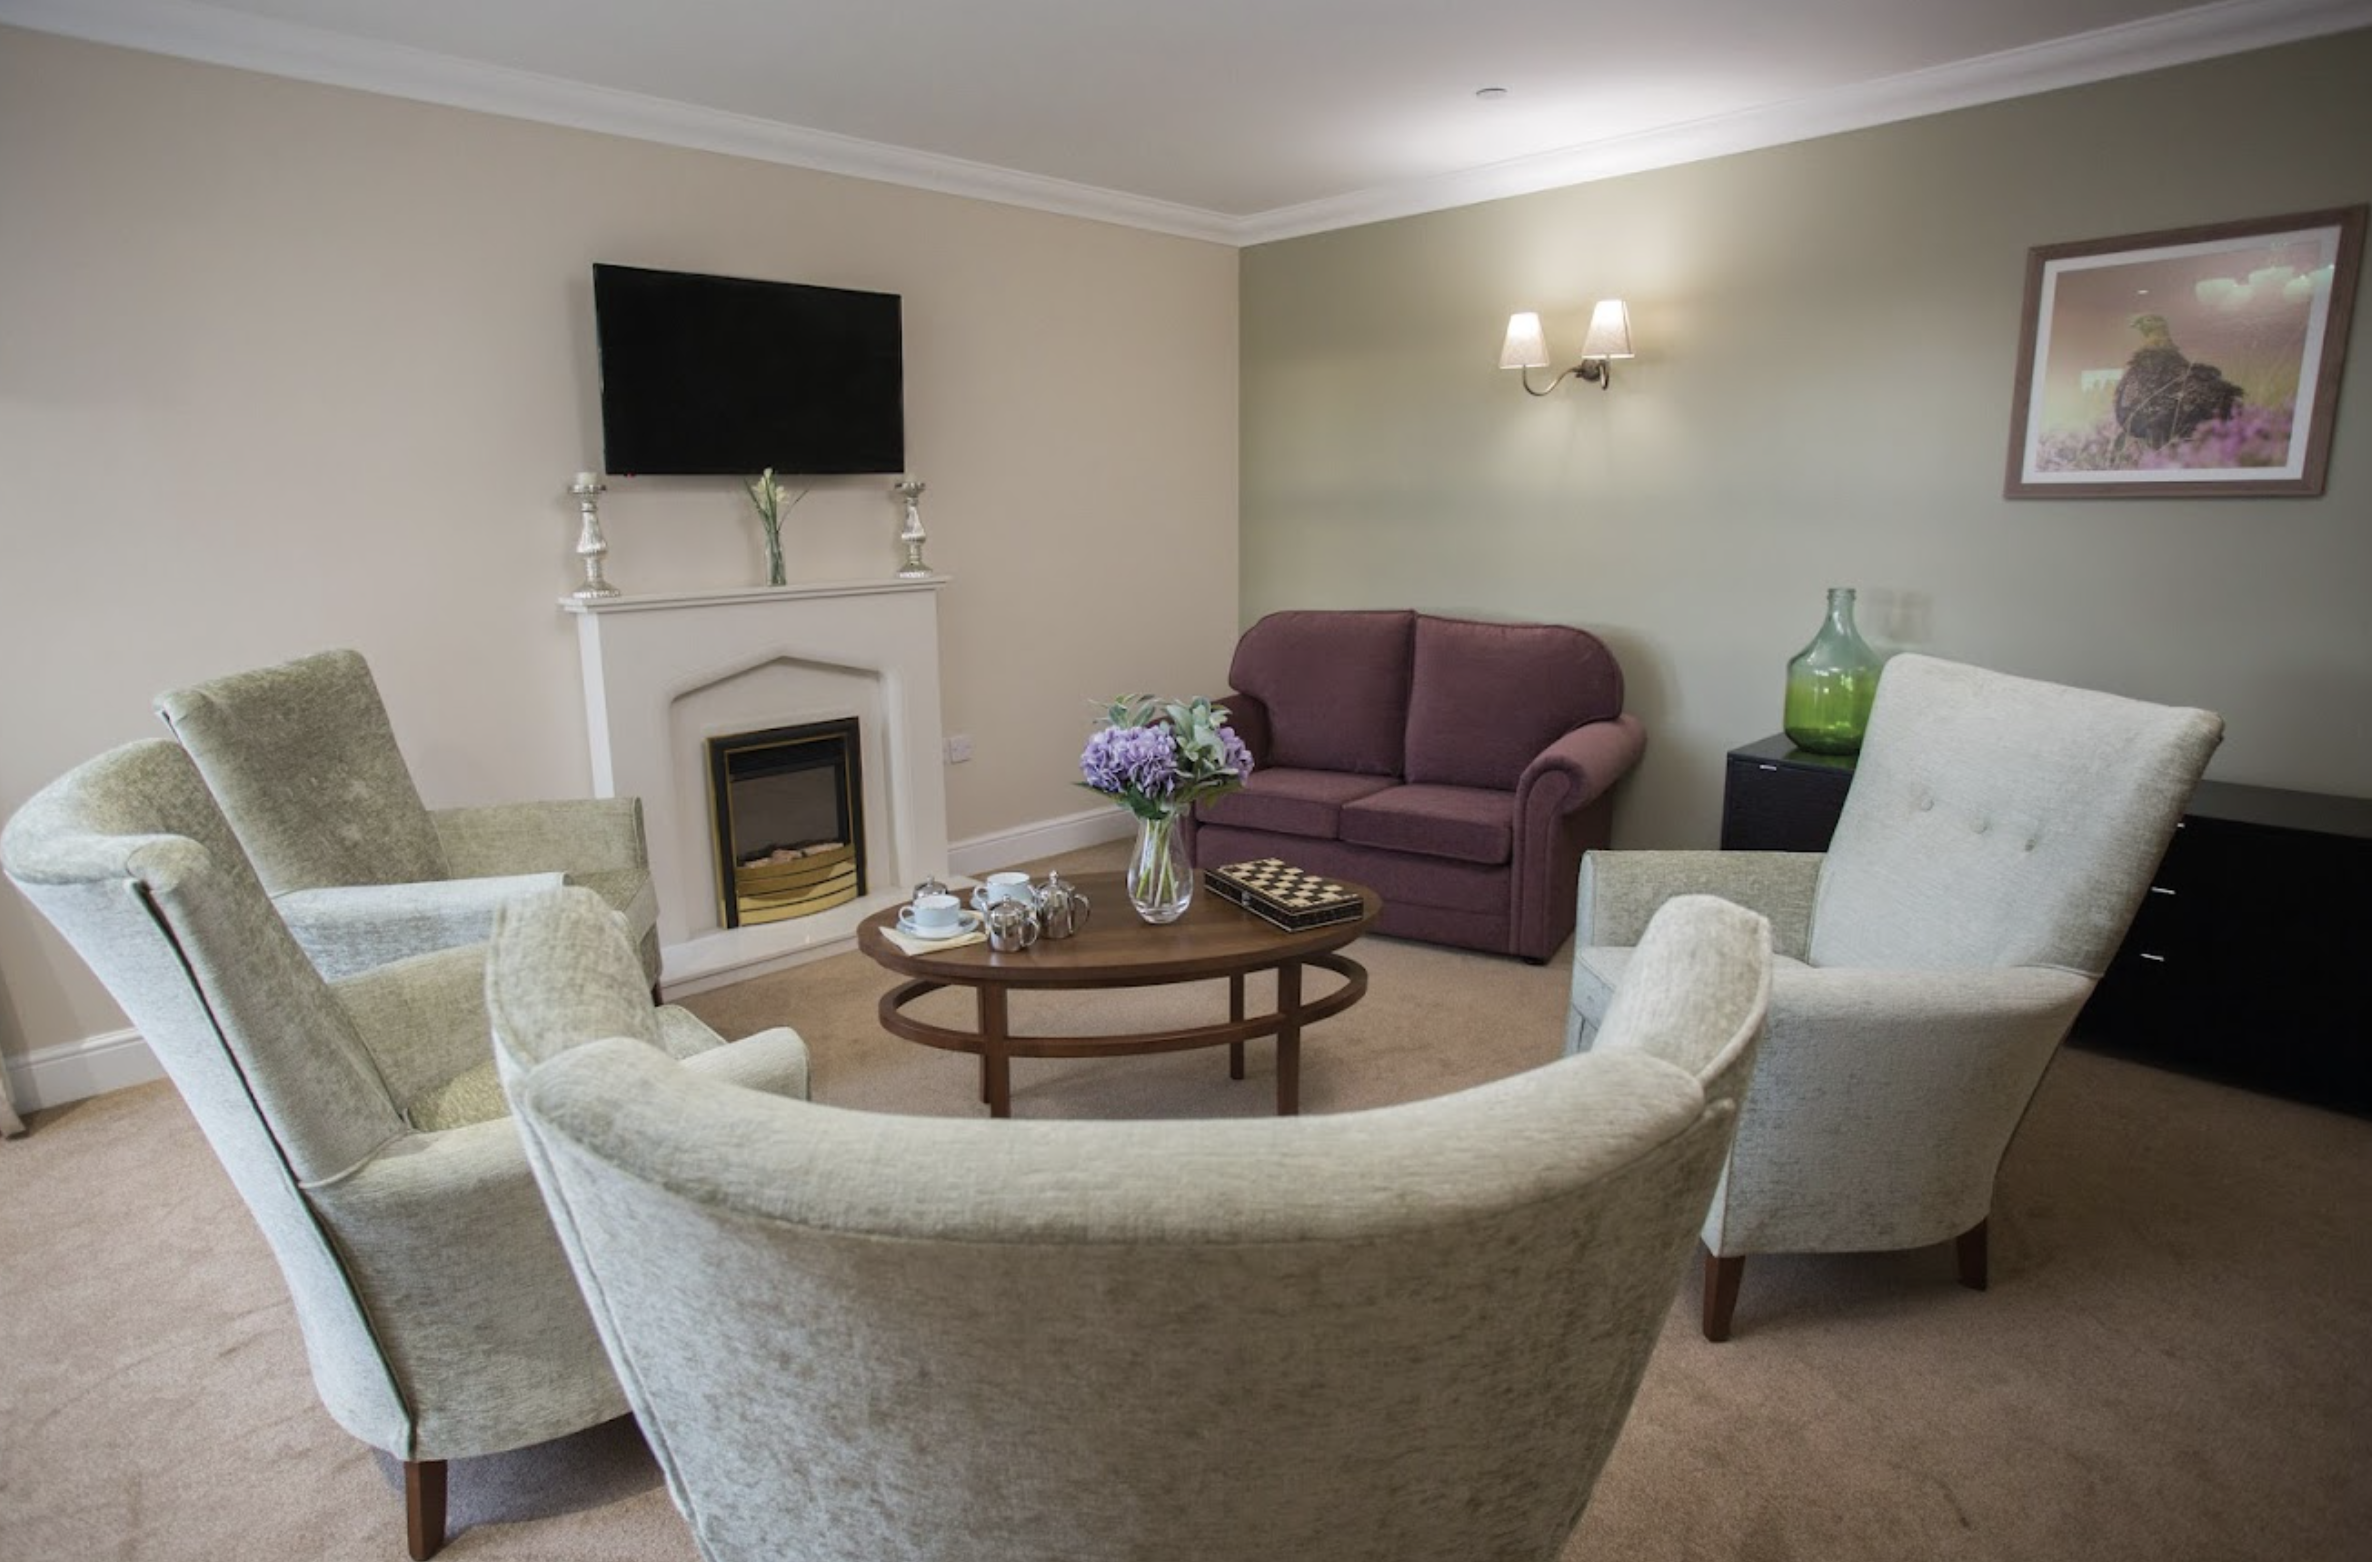 Lounge of Wykebeck Court care home in Leeds, Yorkshire